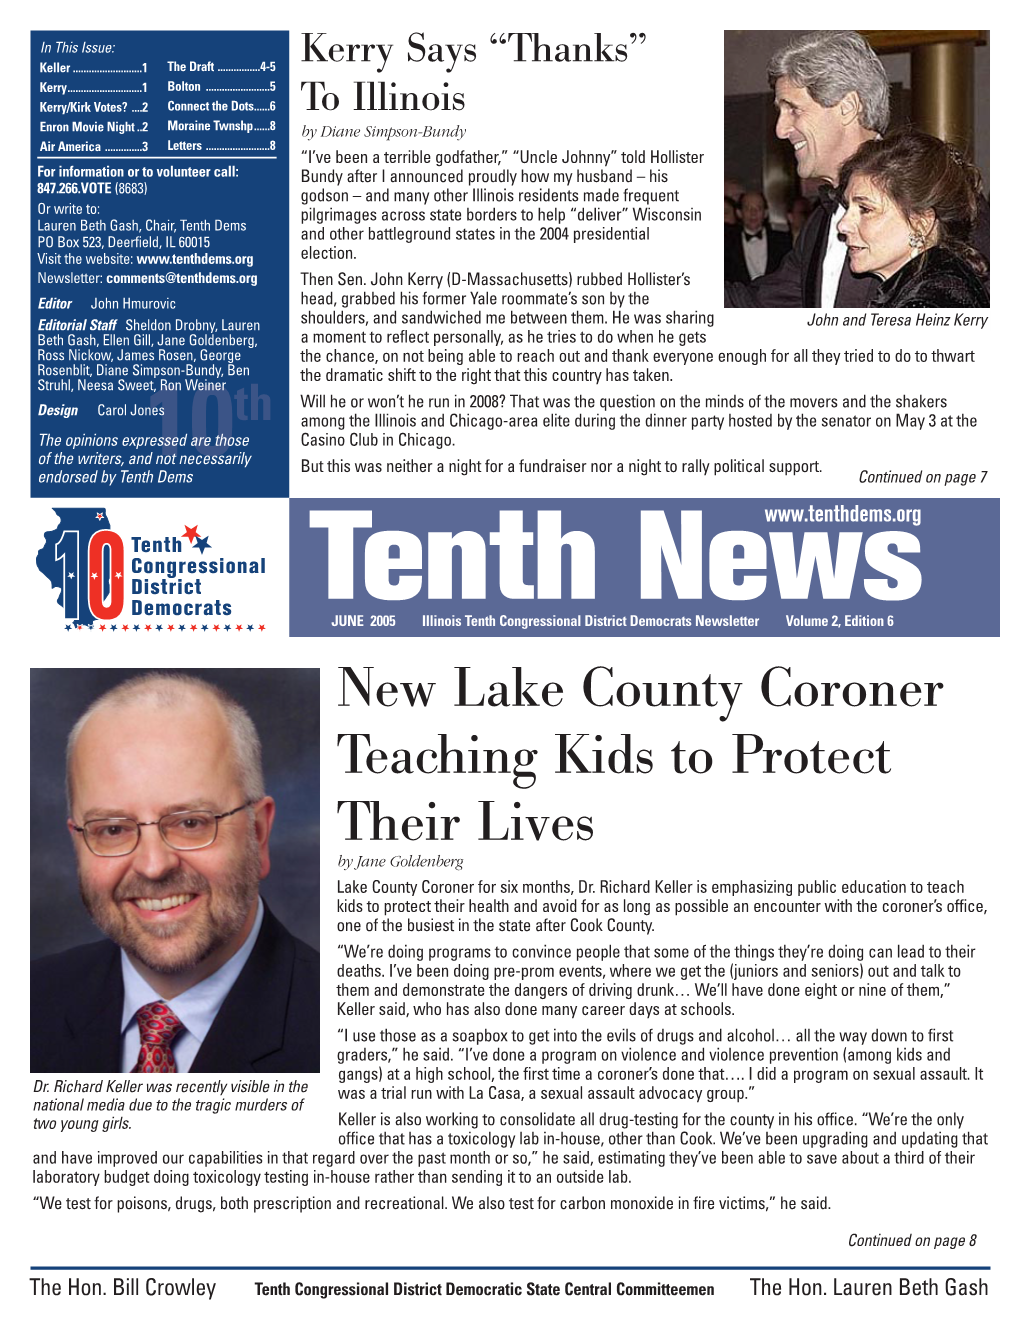 New Lake County Coroner Teaching Kids to Protect Their Lives by Jane Goldenberg Lake County Coroner for Six Months, Dr